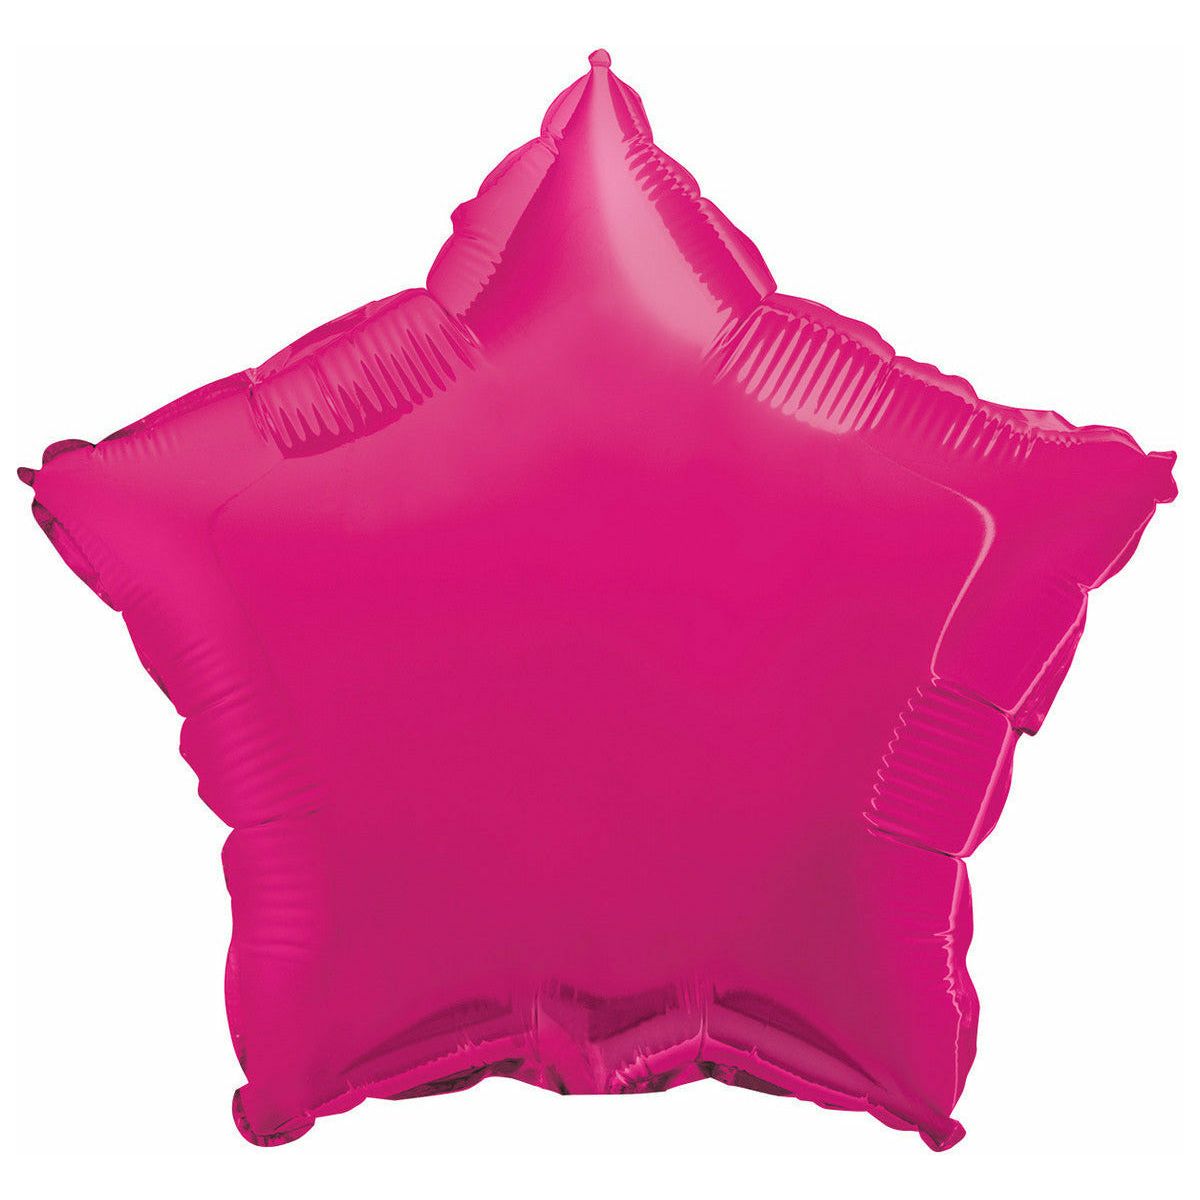 Hot Pink Star Foil Balloon Packaged - 45cm 1 Piece - Dollars and Sense